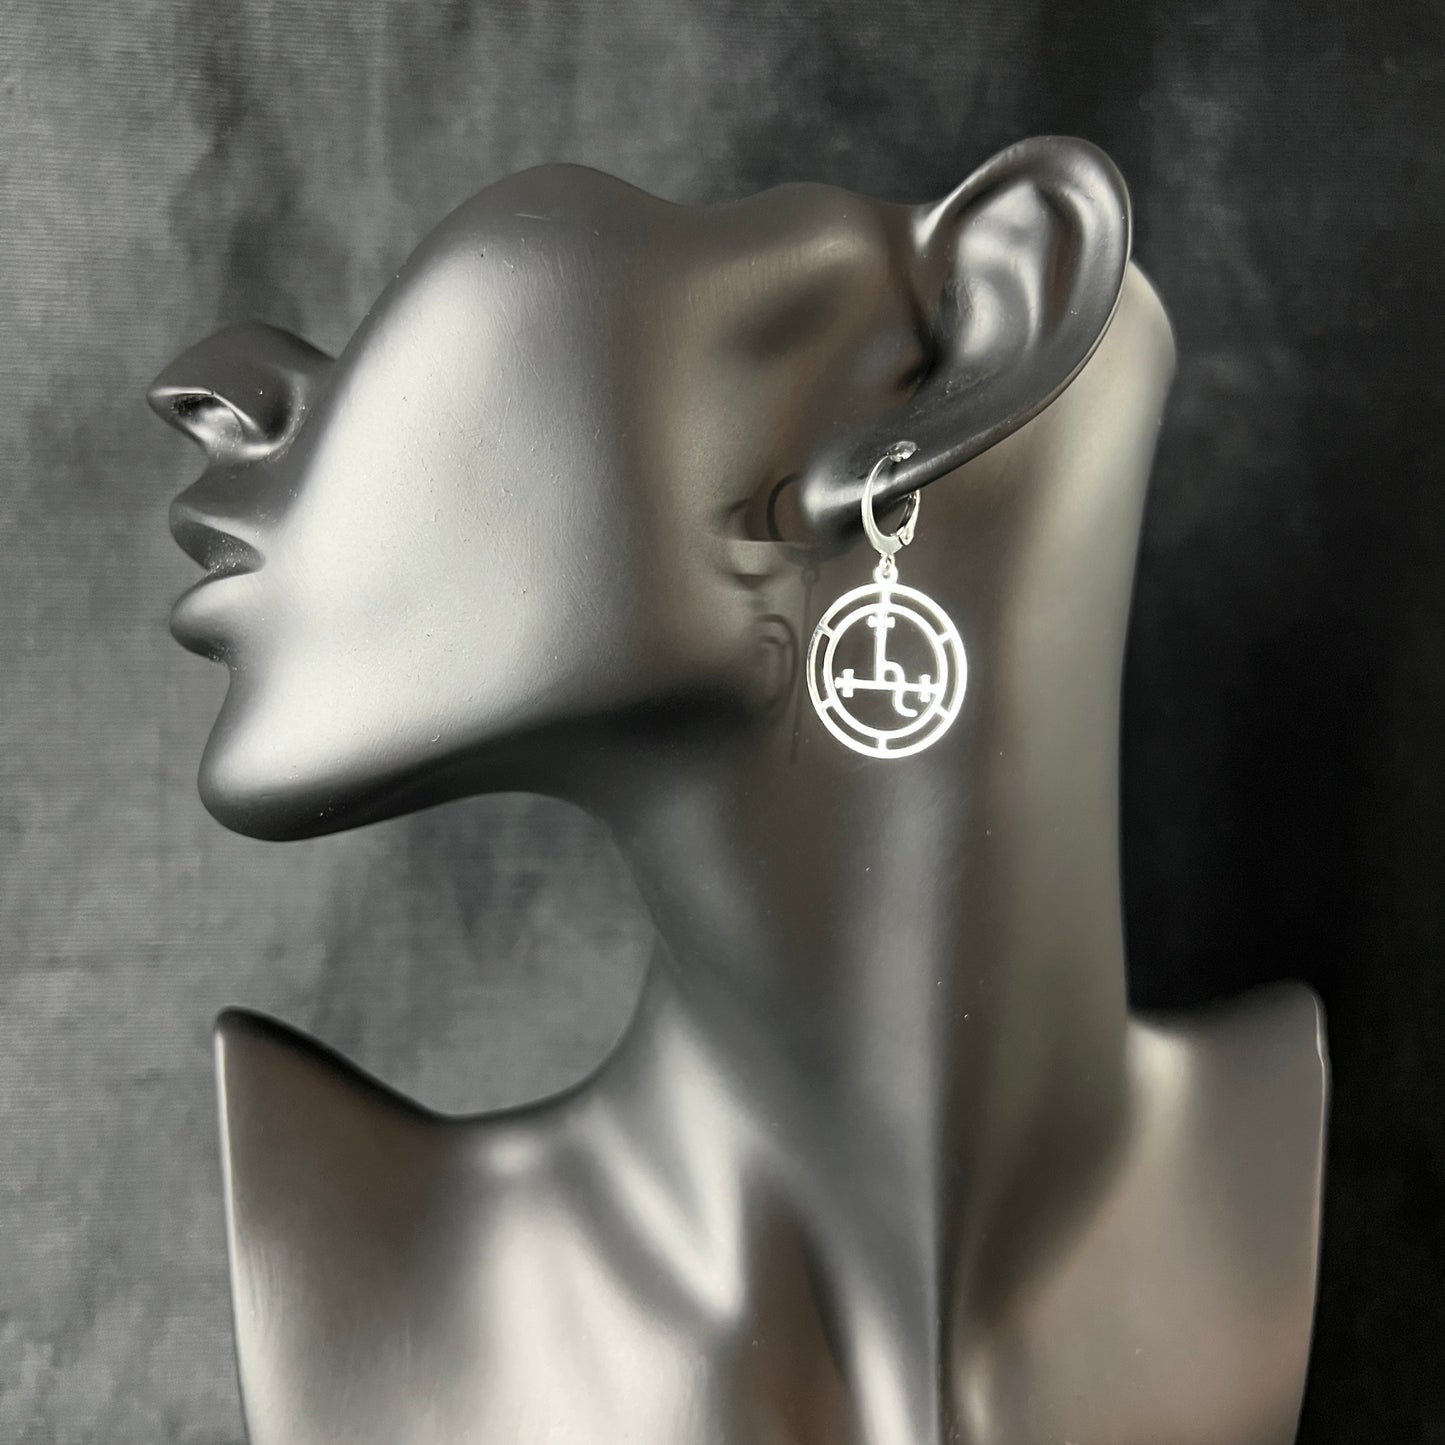 Lilith sigil earrings gold or silver tone gothic occult jewellery hypoallergenic earrings seal of Lilith feminist symbol jewelry